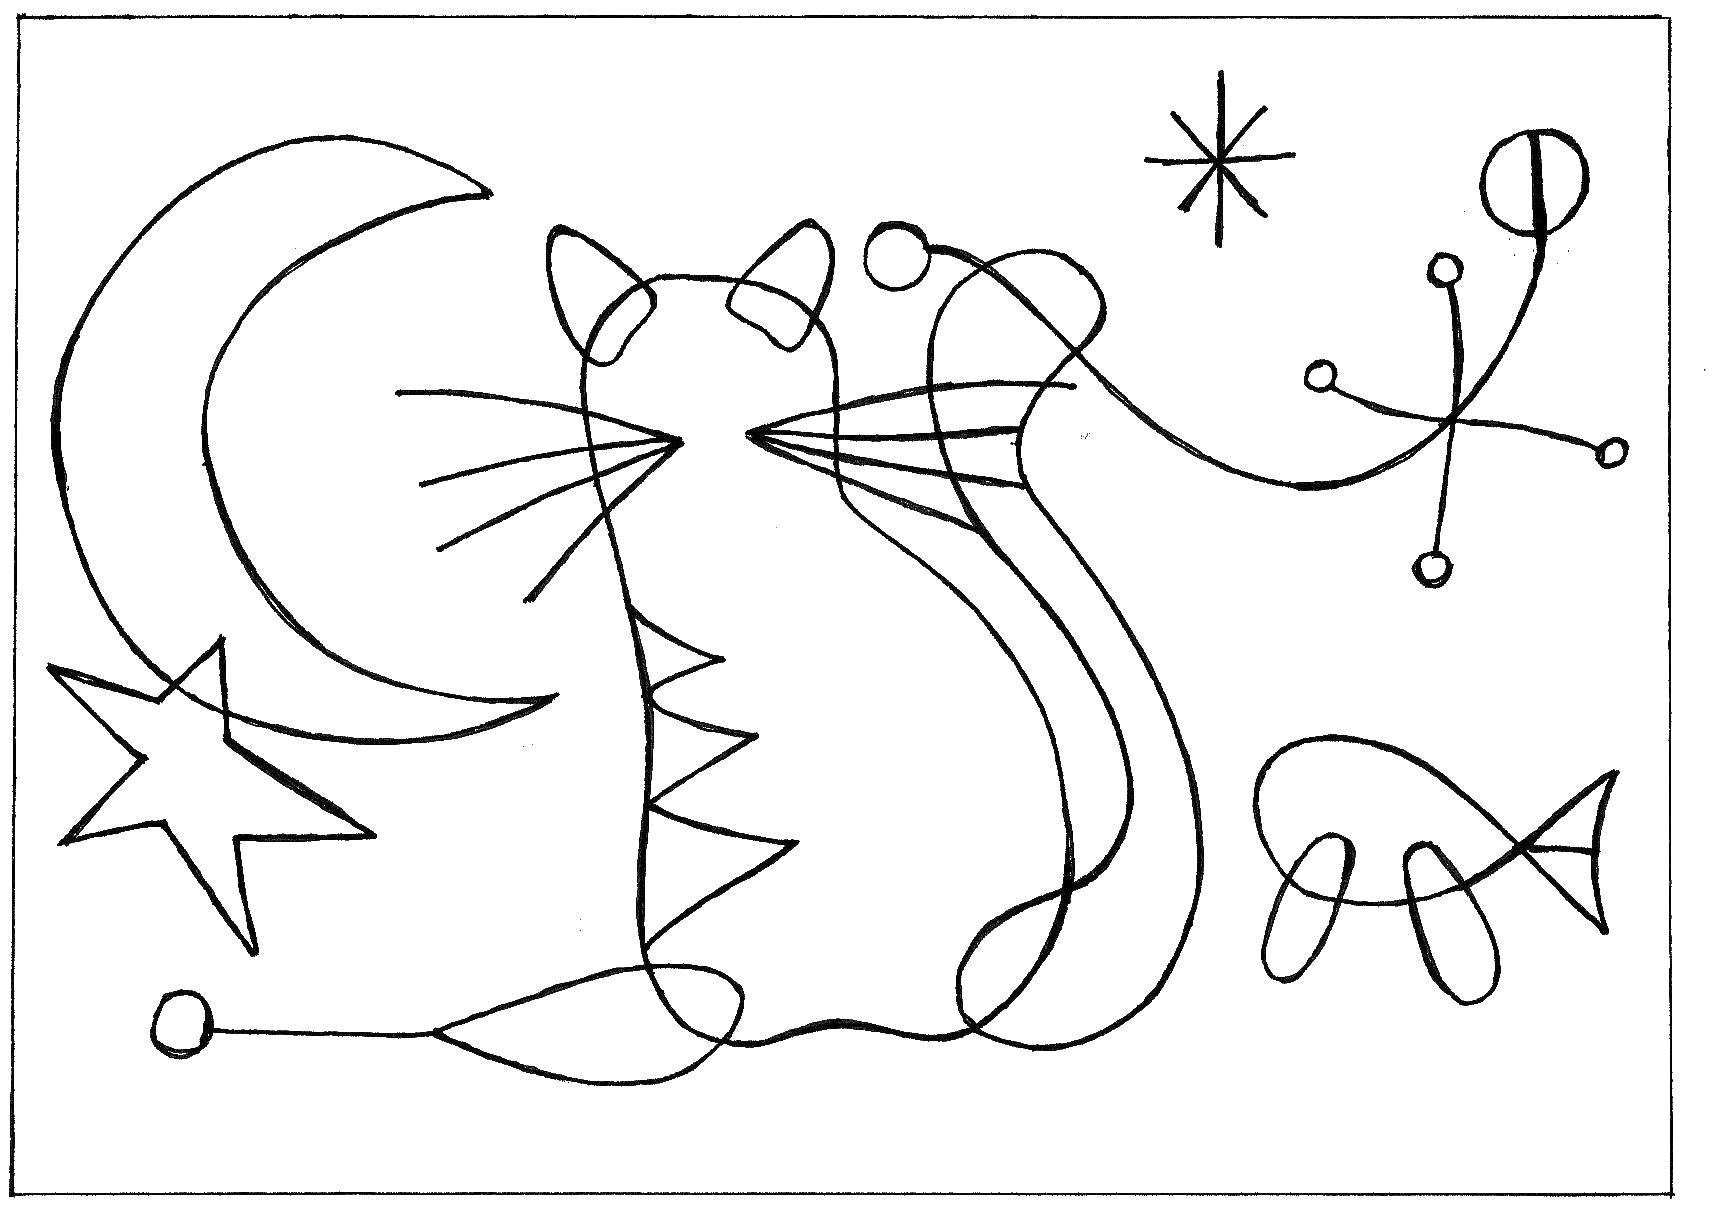 Coloring Abstraction cat fish. Category Animals. Tags:  moon, cat, fish.